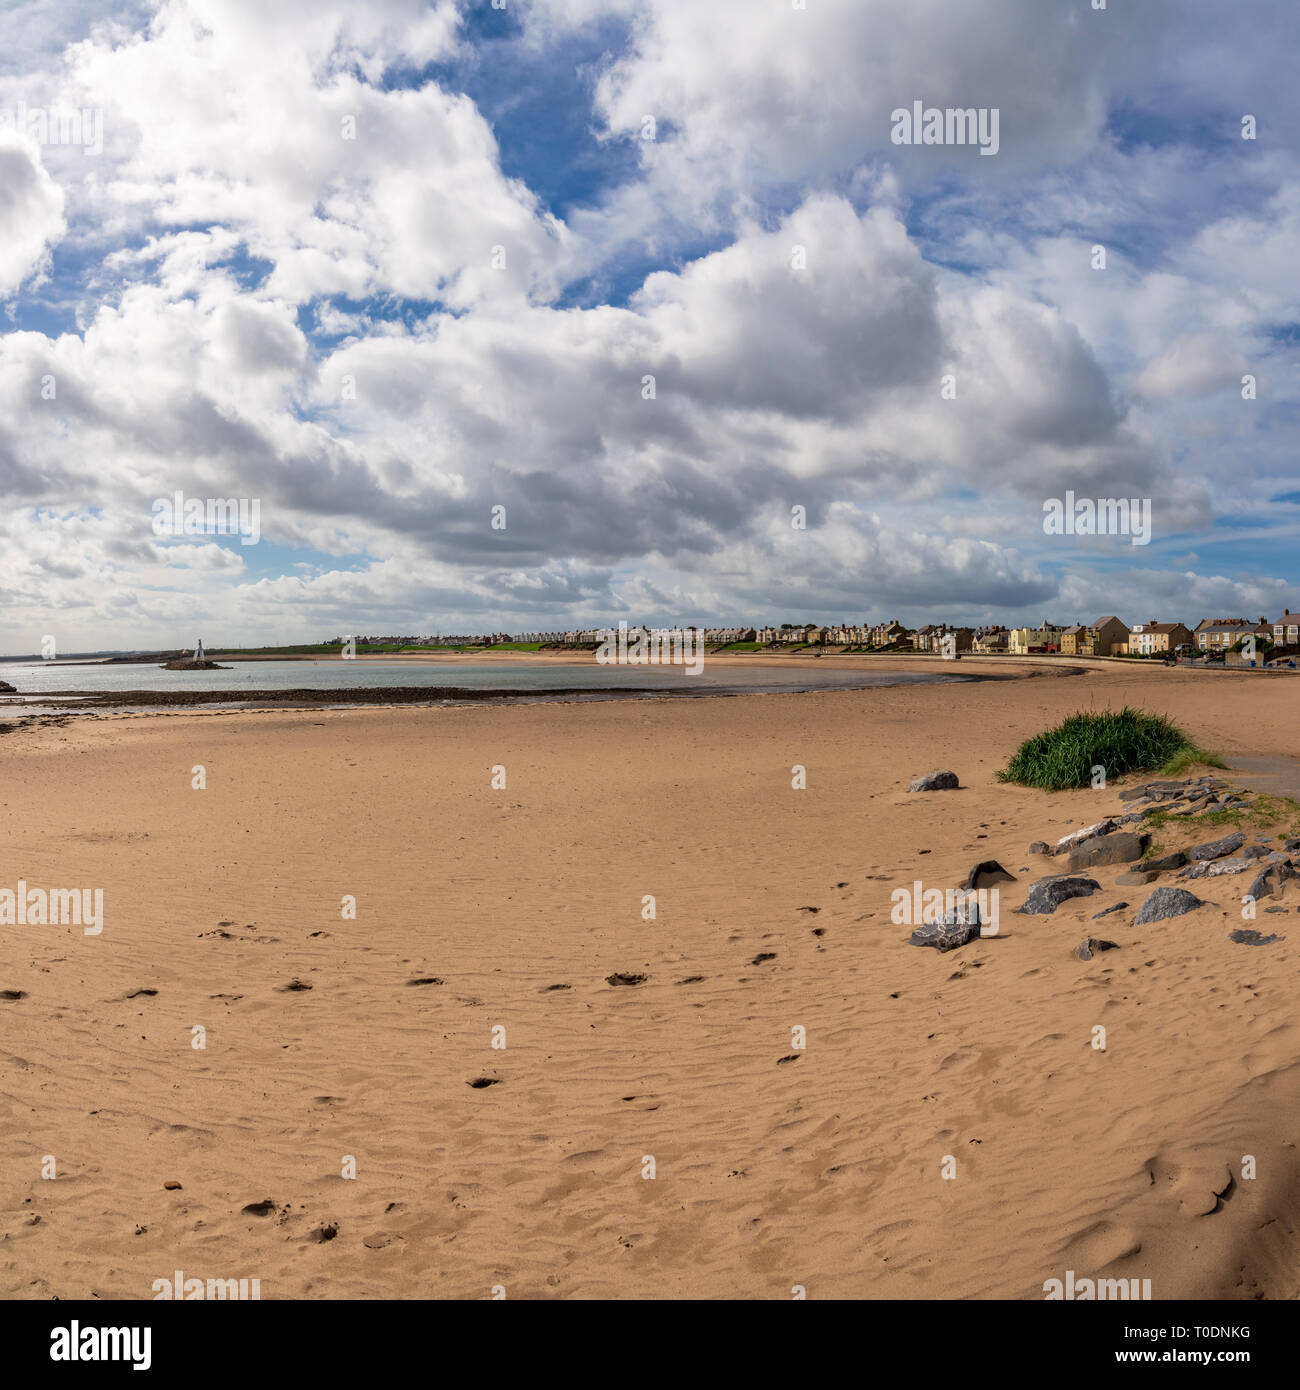 Newbiggin-by-the-Sea, Northumberland, England, UK - September 11, 2018: View at the beach with The Couple (statue) and breakwater Stock Photo